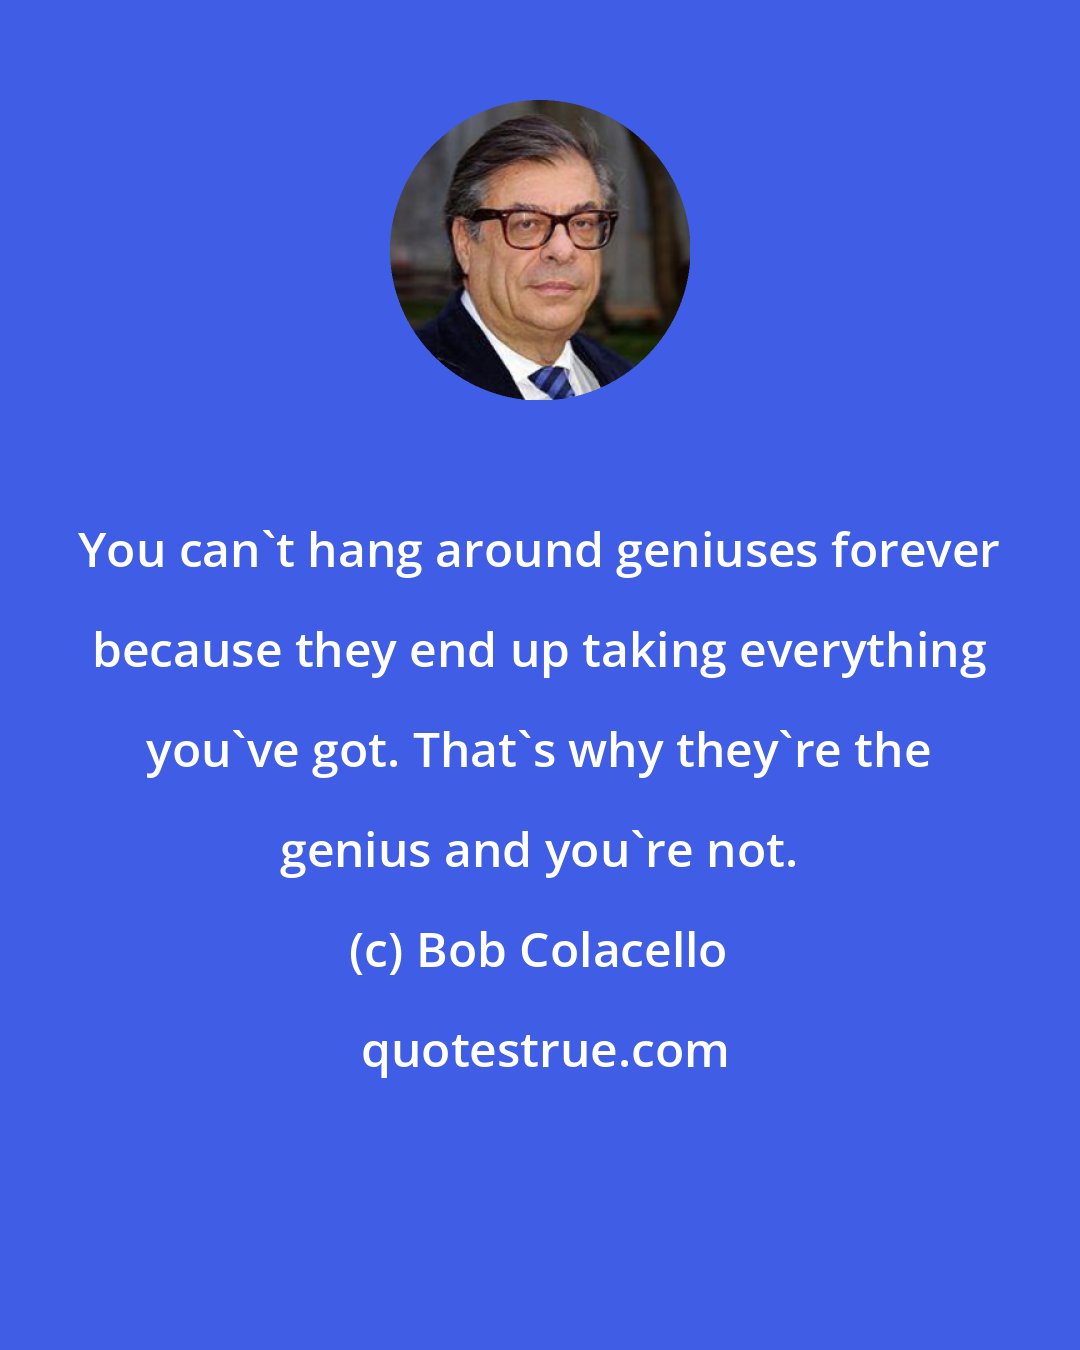 Bob Colacello: You can't hang around geniuses forever because they end up taking everything you've got. That's why they're the genius and you're not.